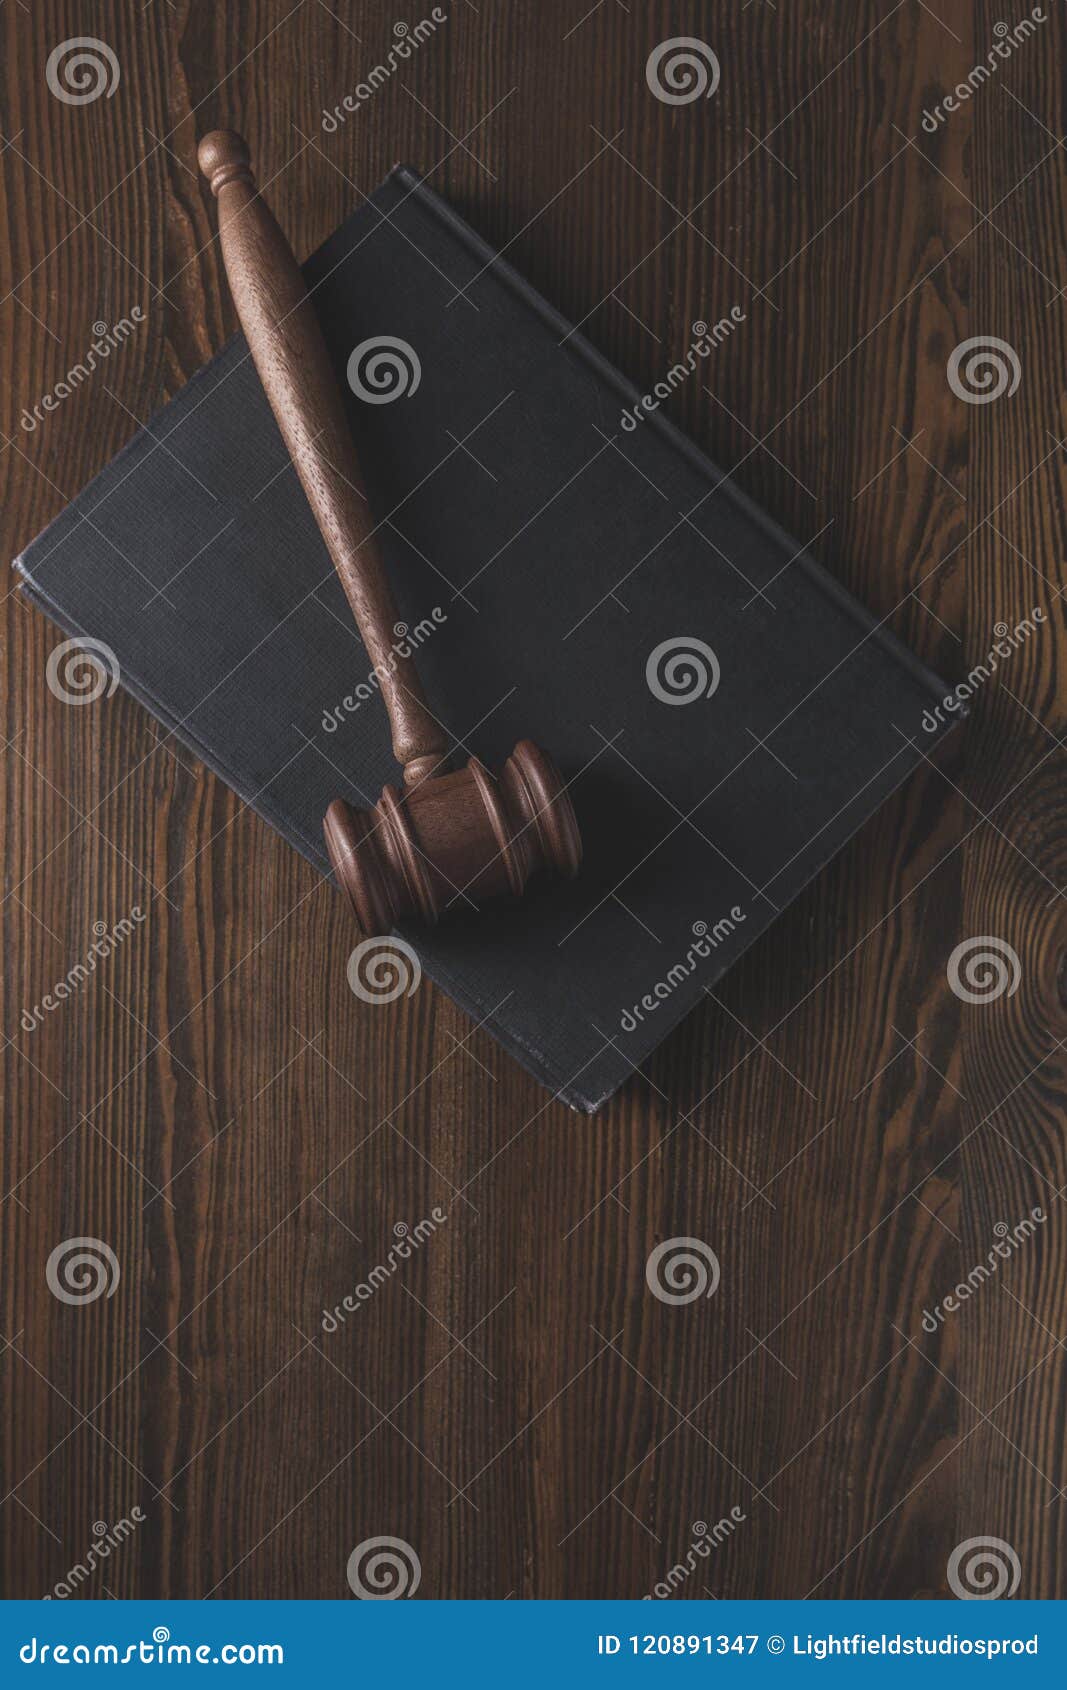 juridical book with hammer on wooden table,